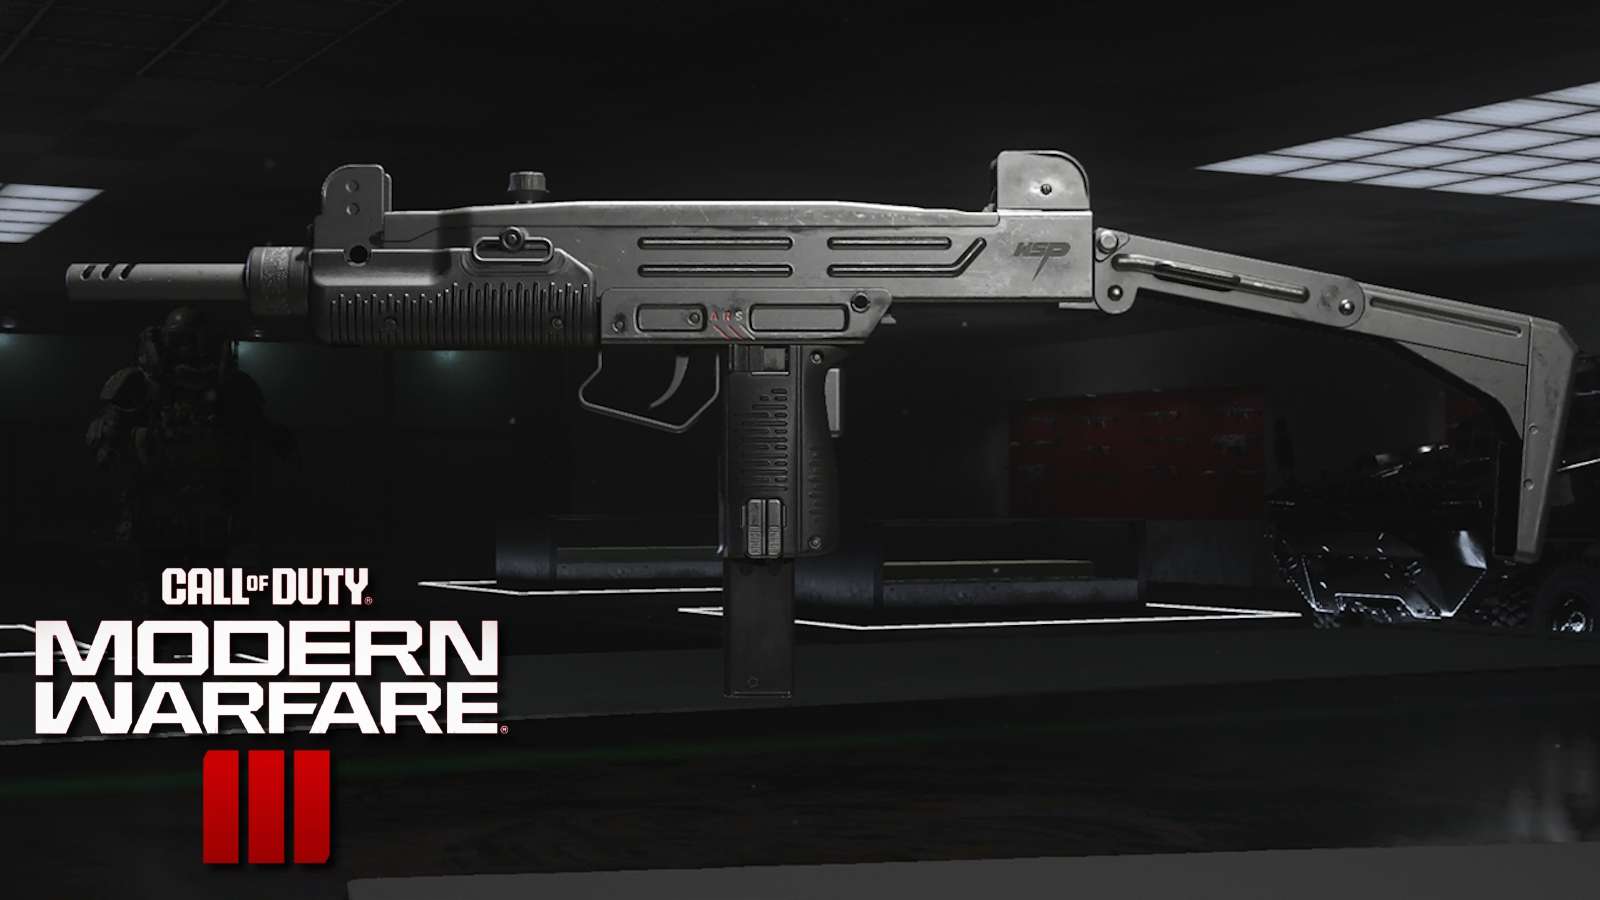 WSP-9 SMG in Modern Warfare 3 with game logo